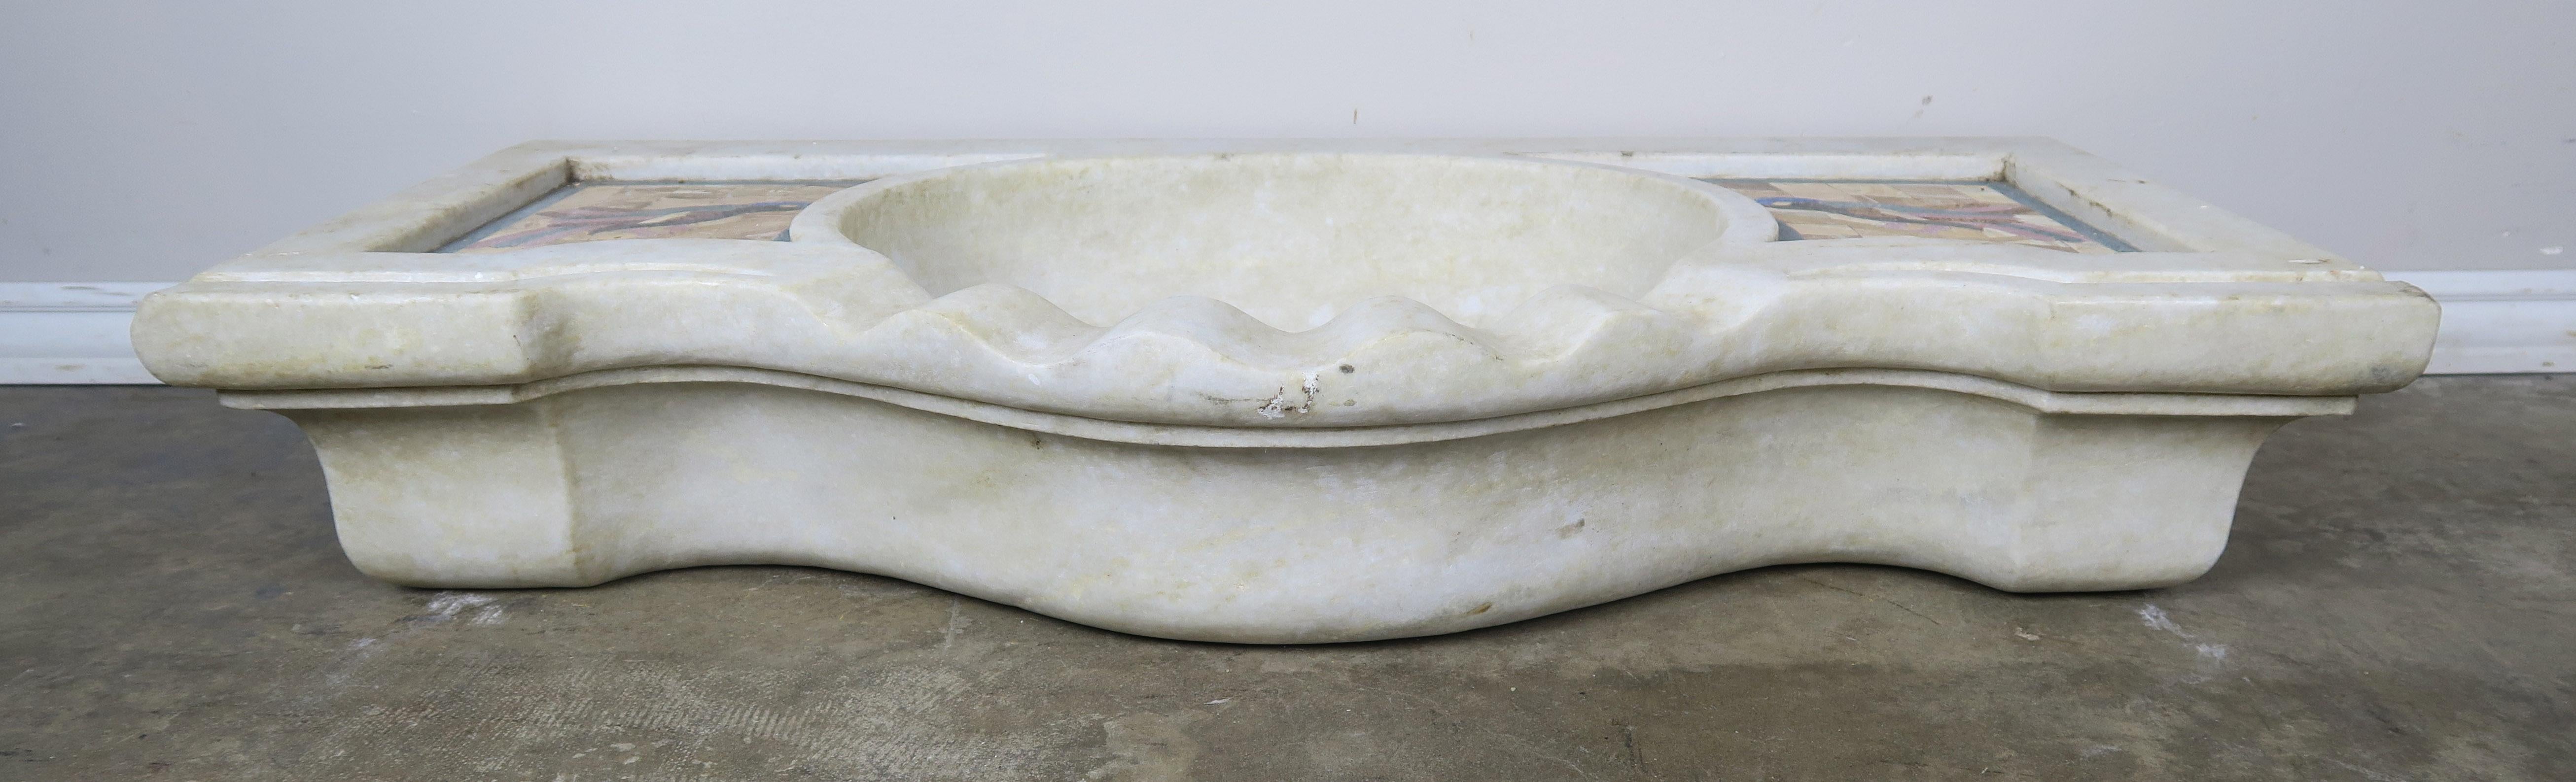 Unique Serpentine shaped front Carrara marble sink that has been beautifully inlaid with birds on either side in soft hues of golds & taupes with touches of pink, blue, green and black in the bodies of the birds.